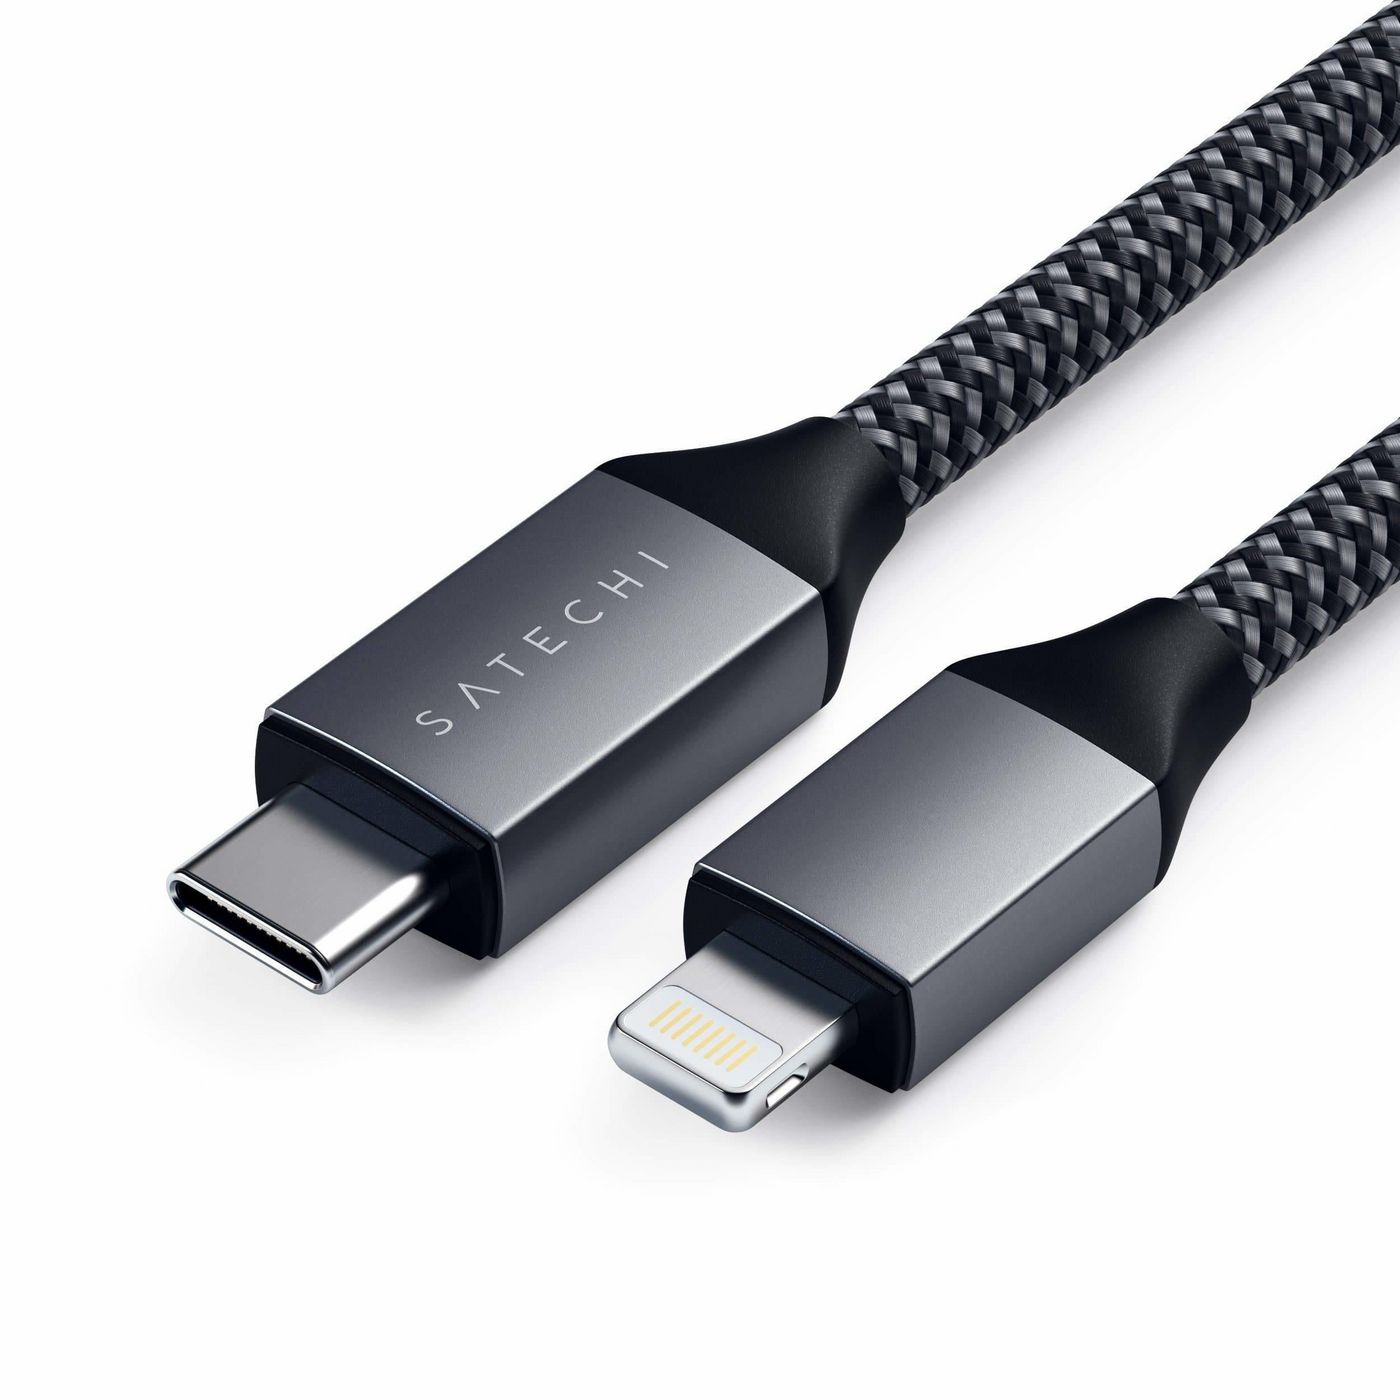 Satechi W126585981 ST-TCL18M lightning cable 1.8 